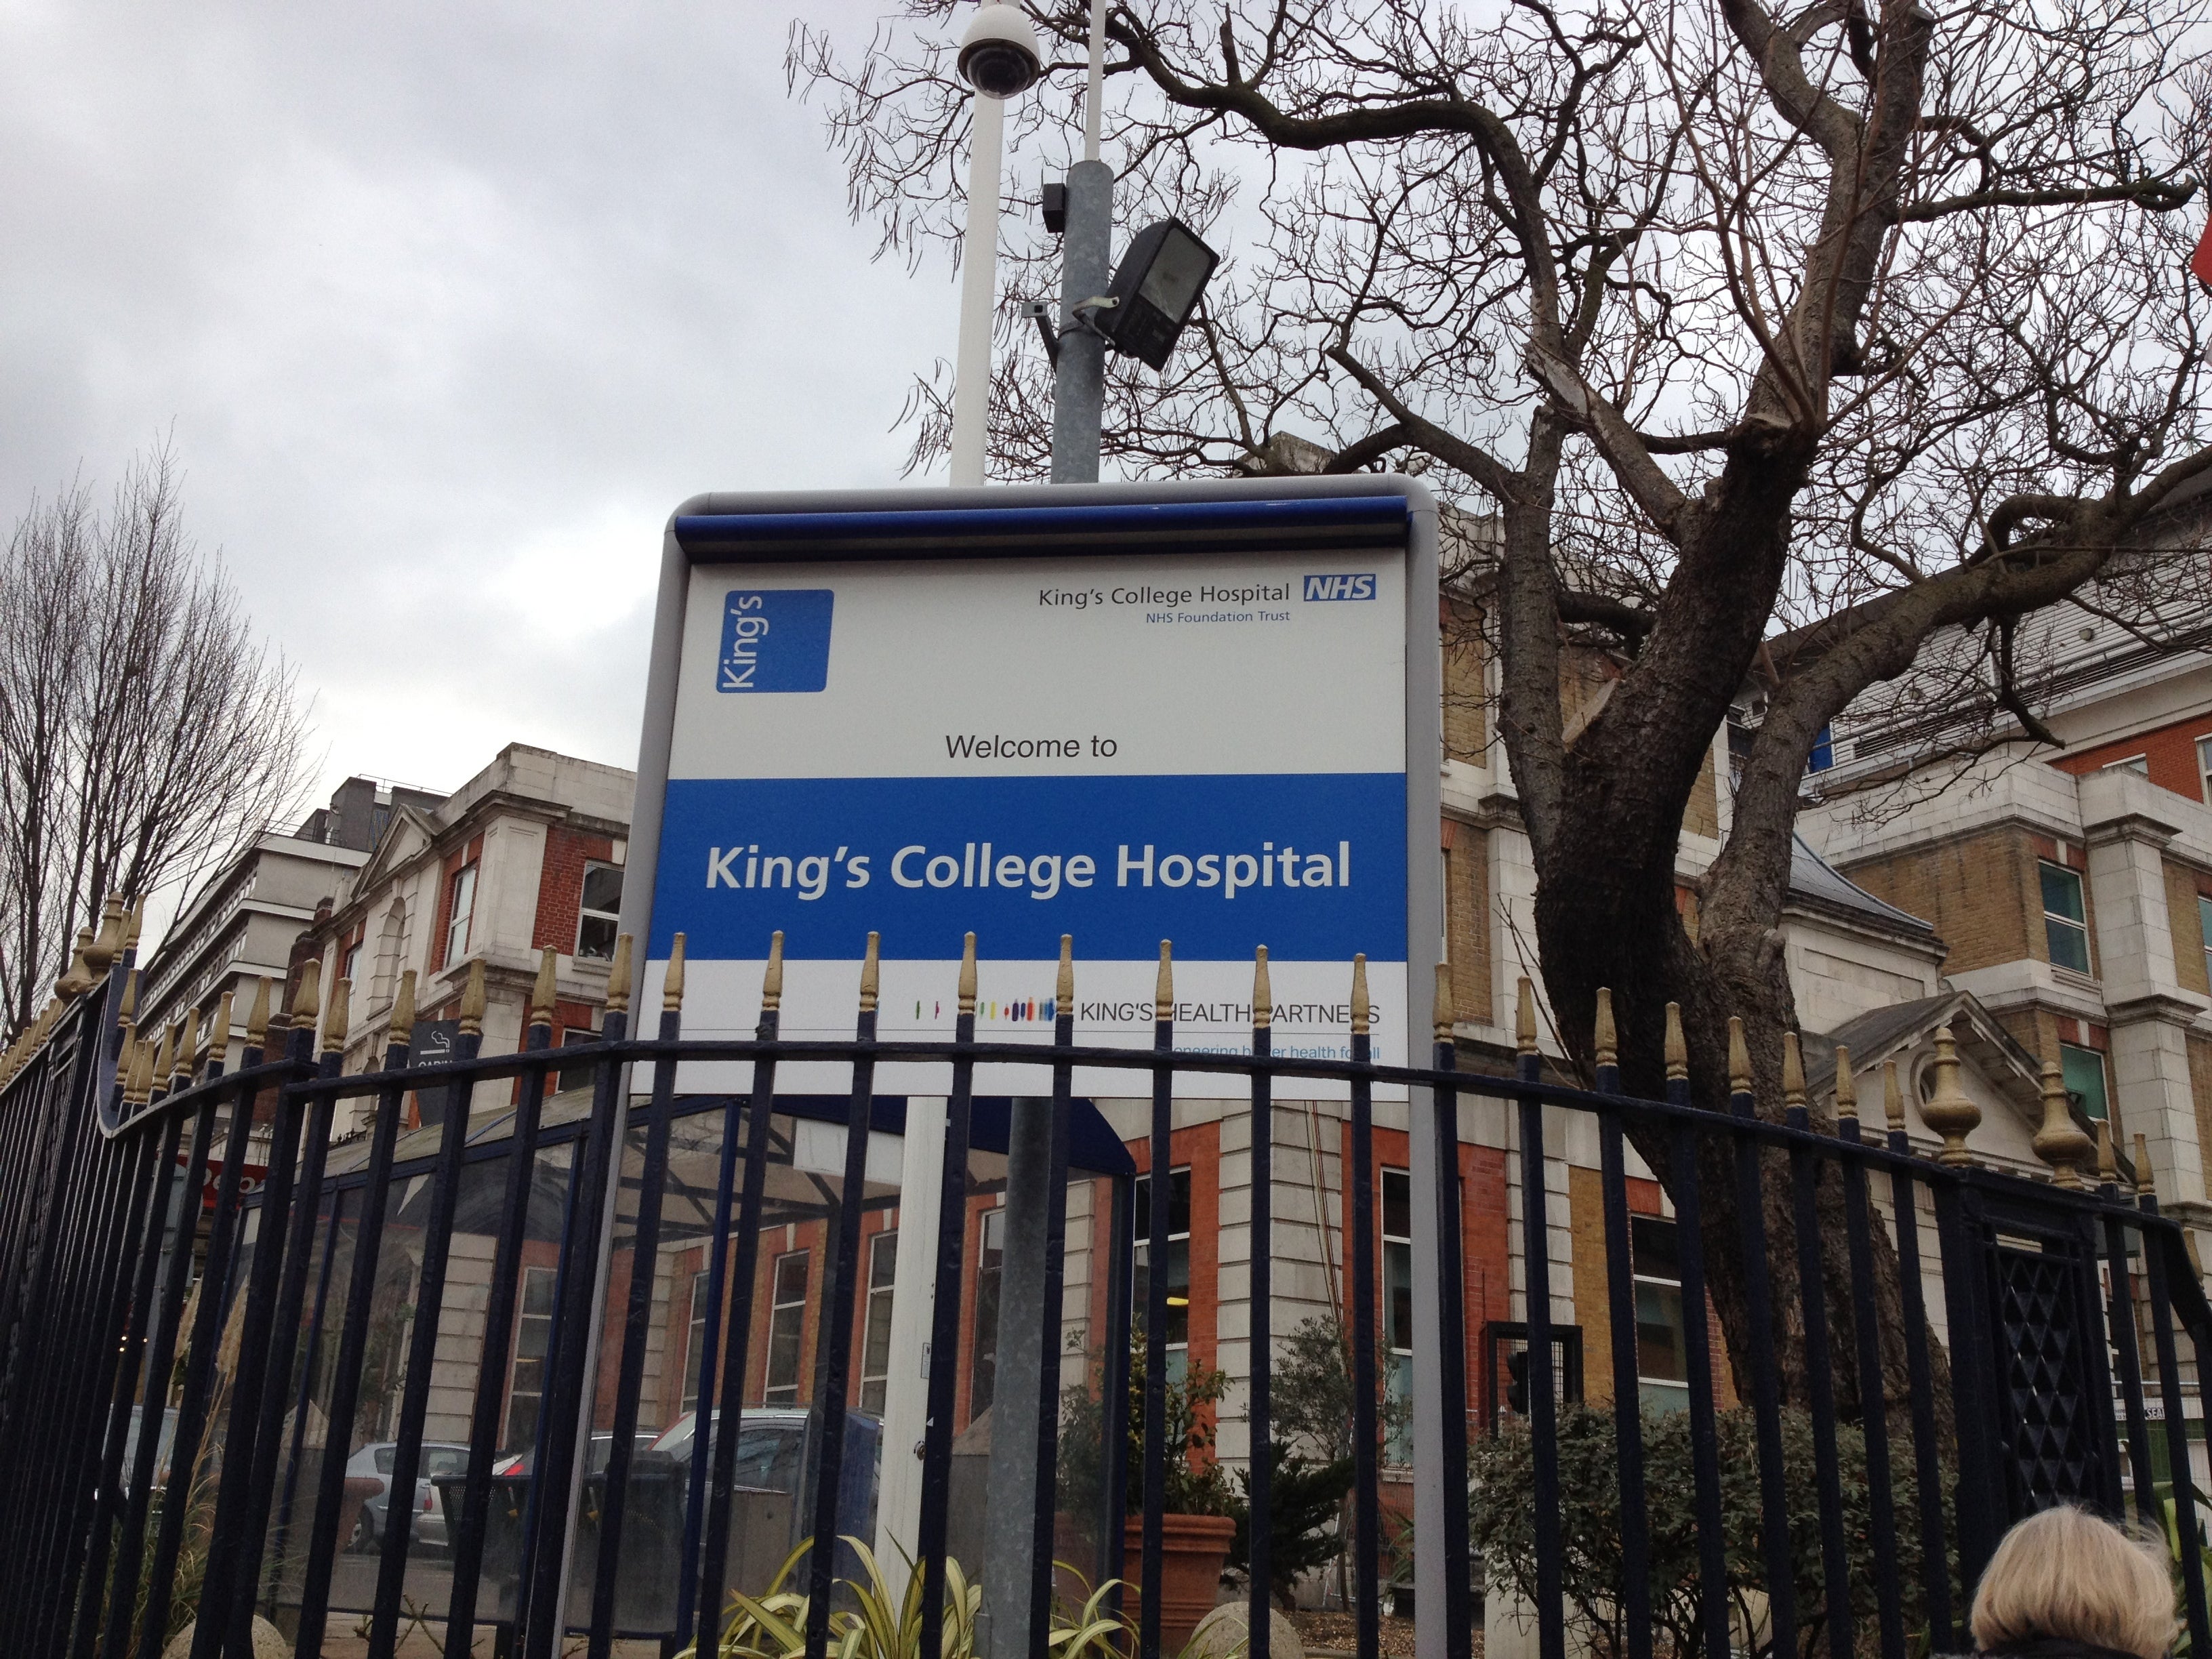 The victim was found outside King’s College Hospital in south London